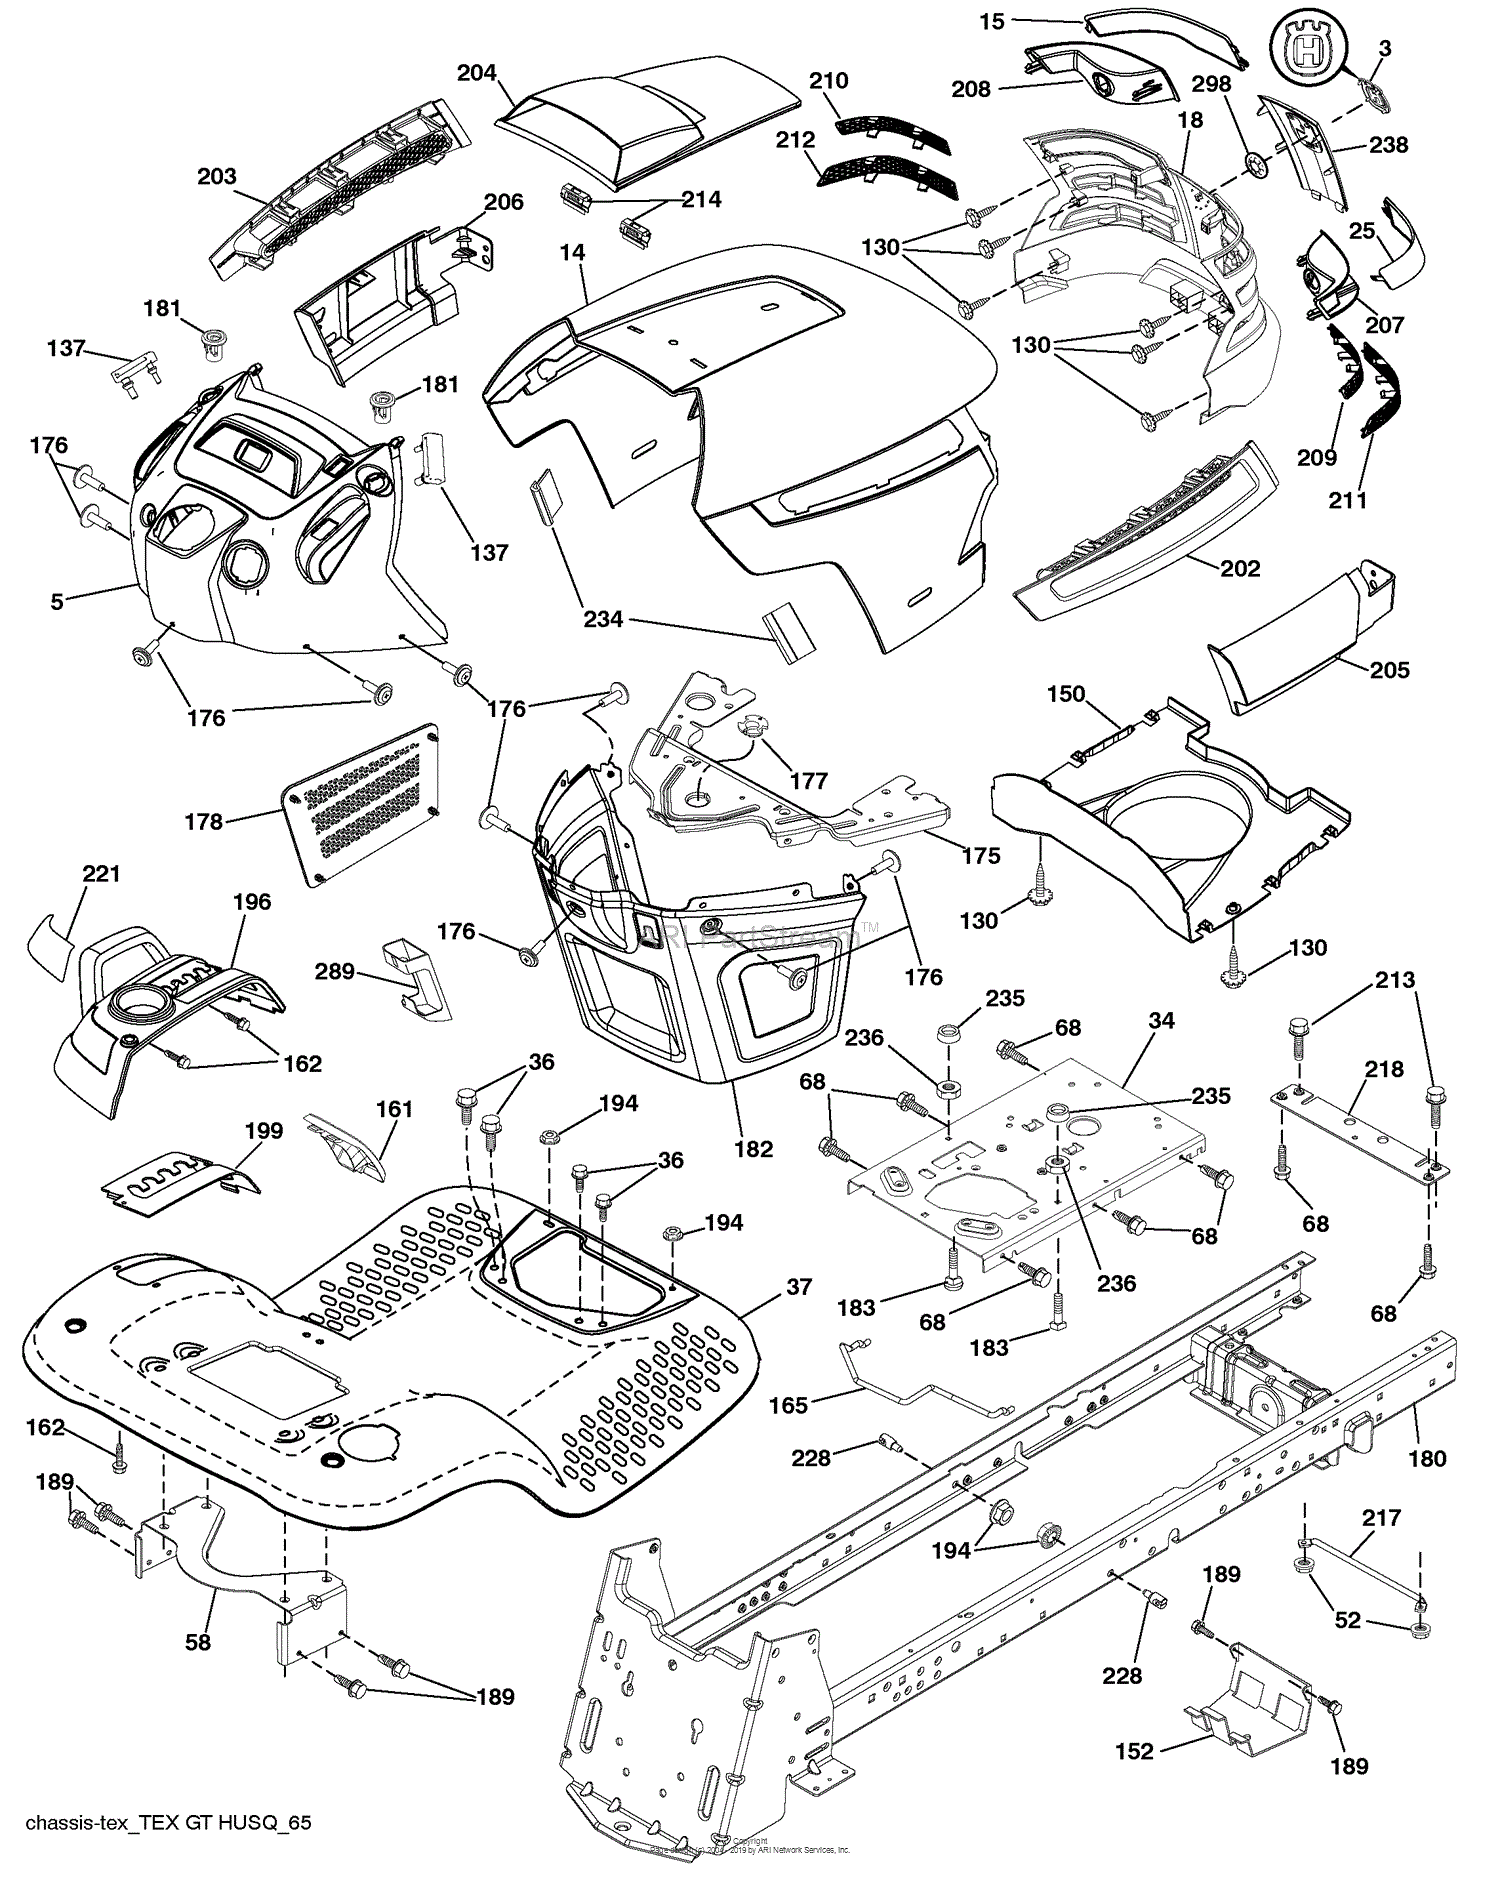 Husqvarna LGT 2554 (96045001501) (2009-05) Parts Diagram for Chassis